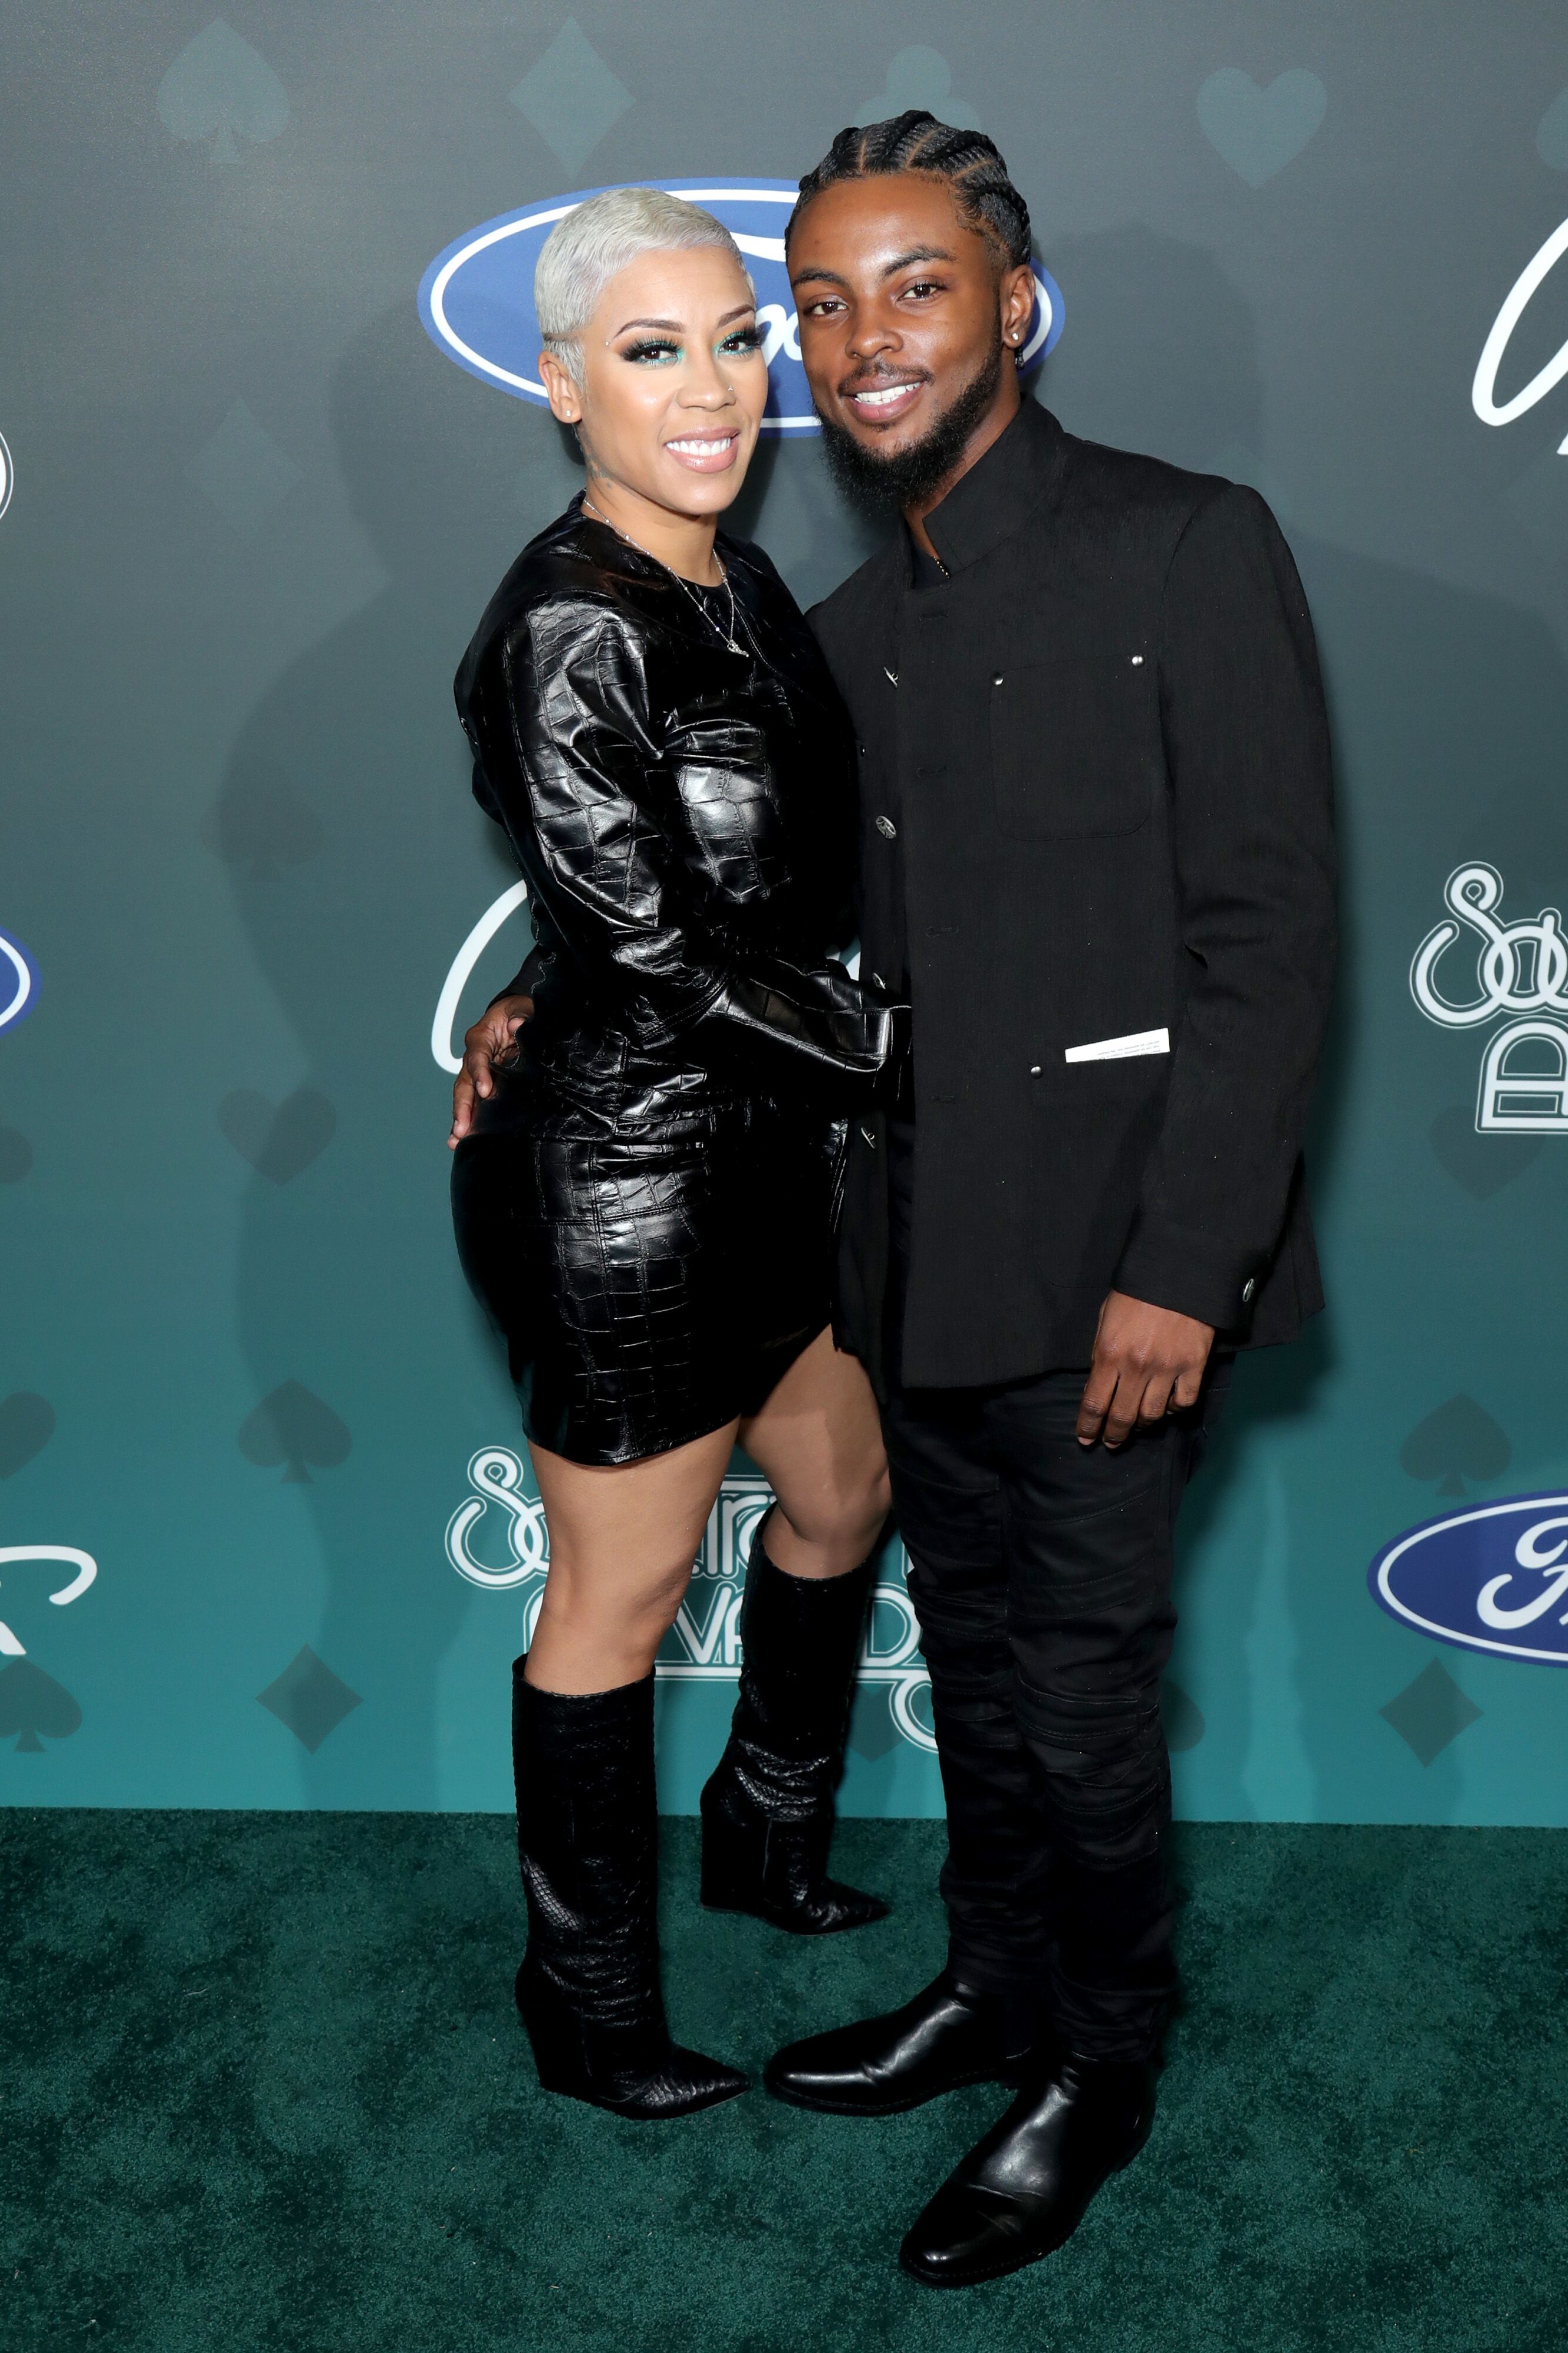 Keyshia Cole and Niko Khale attend a formal event together | Source: Getty Images/GlobalImagesUkraine